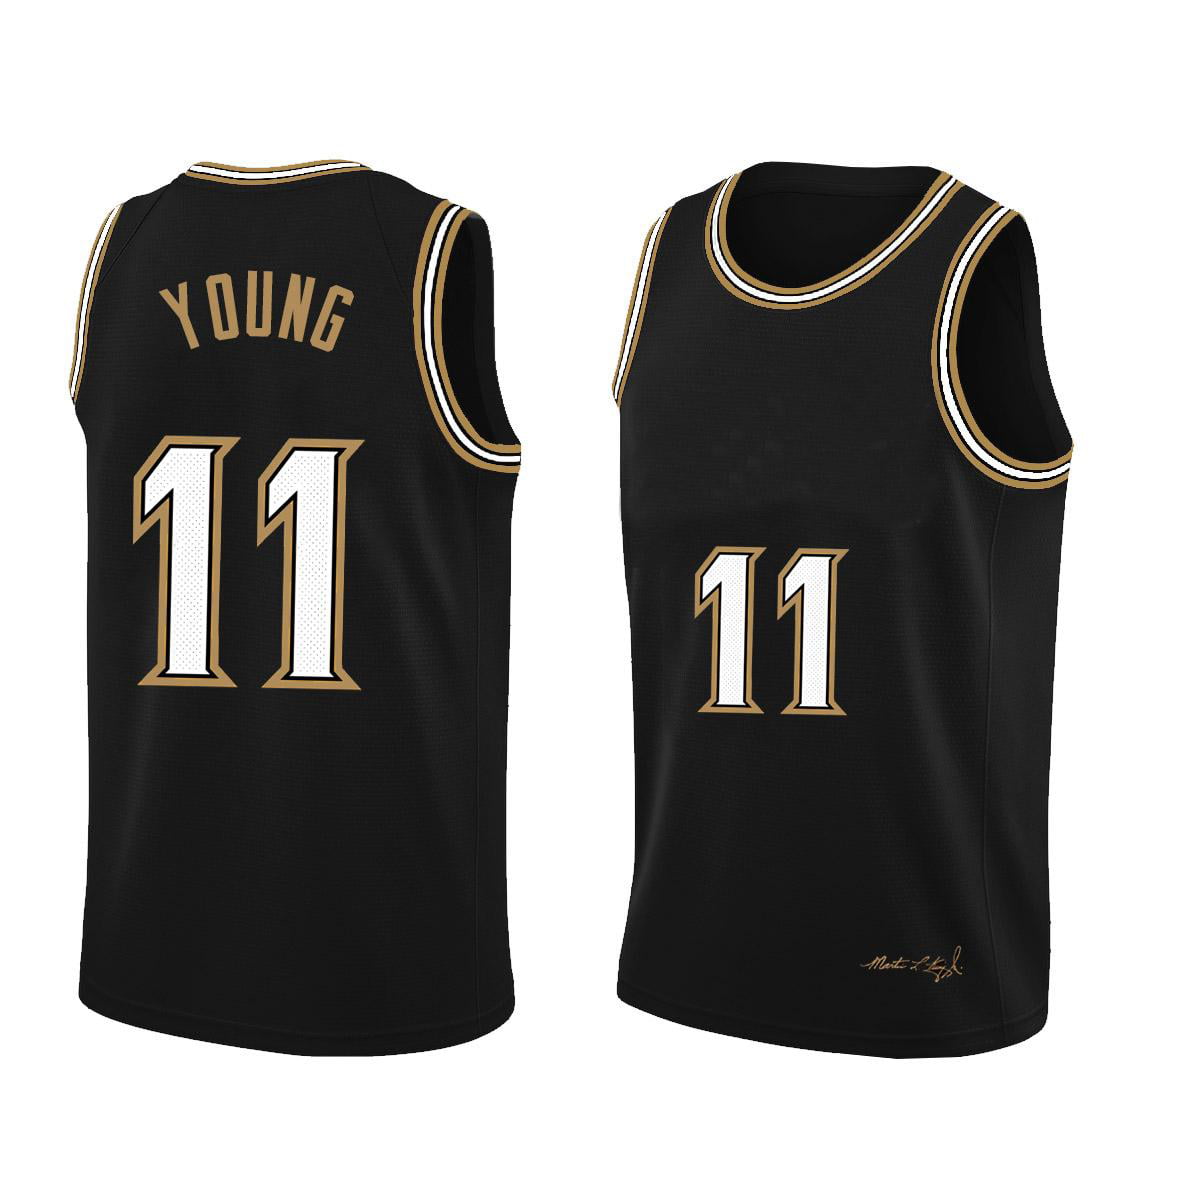 The Finals Patch Basketball Valley Chris Paul Jersey 3 Devin Booker Jerseys  1 DeAndre Ayton 22 Black White Purple Orange Men Stitched Good Champions  From Top_sport_mall, $11.98